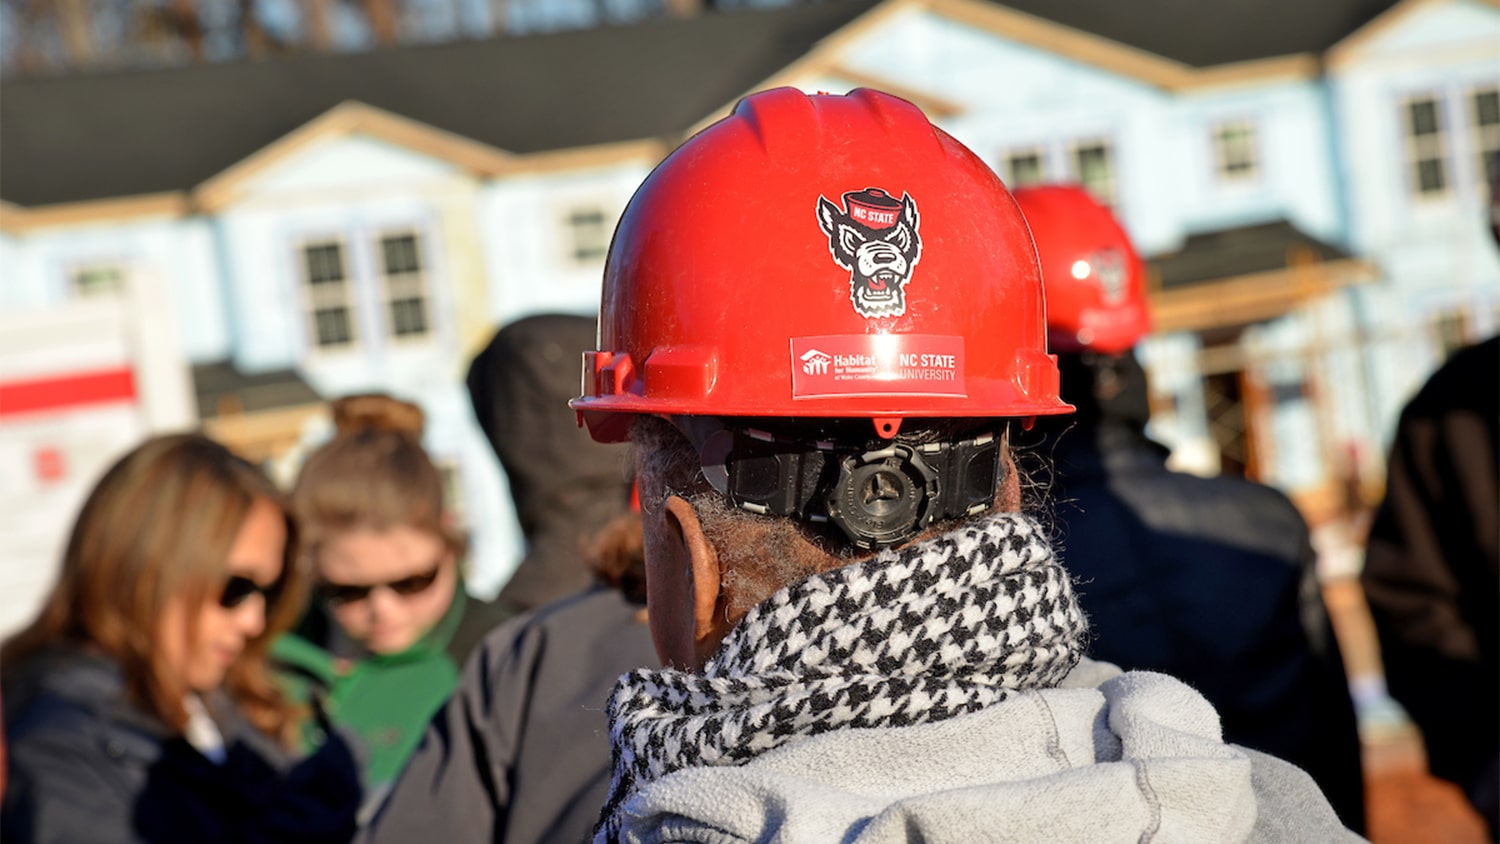 A man wearing a red hardhat with the NC State Wolfpack logo on it, in the middle of a group of volunteers at a Habitat for Humanity build project.